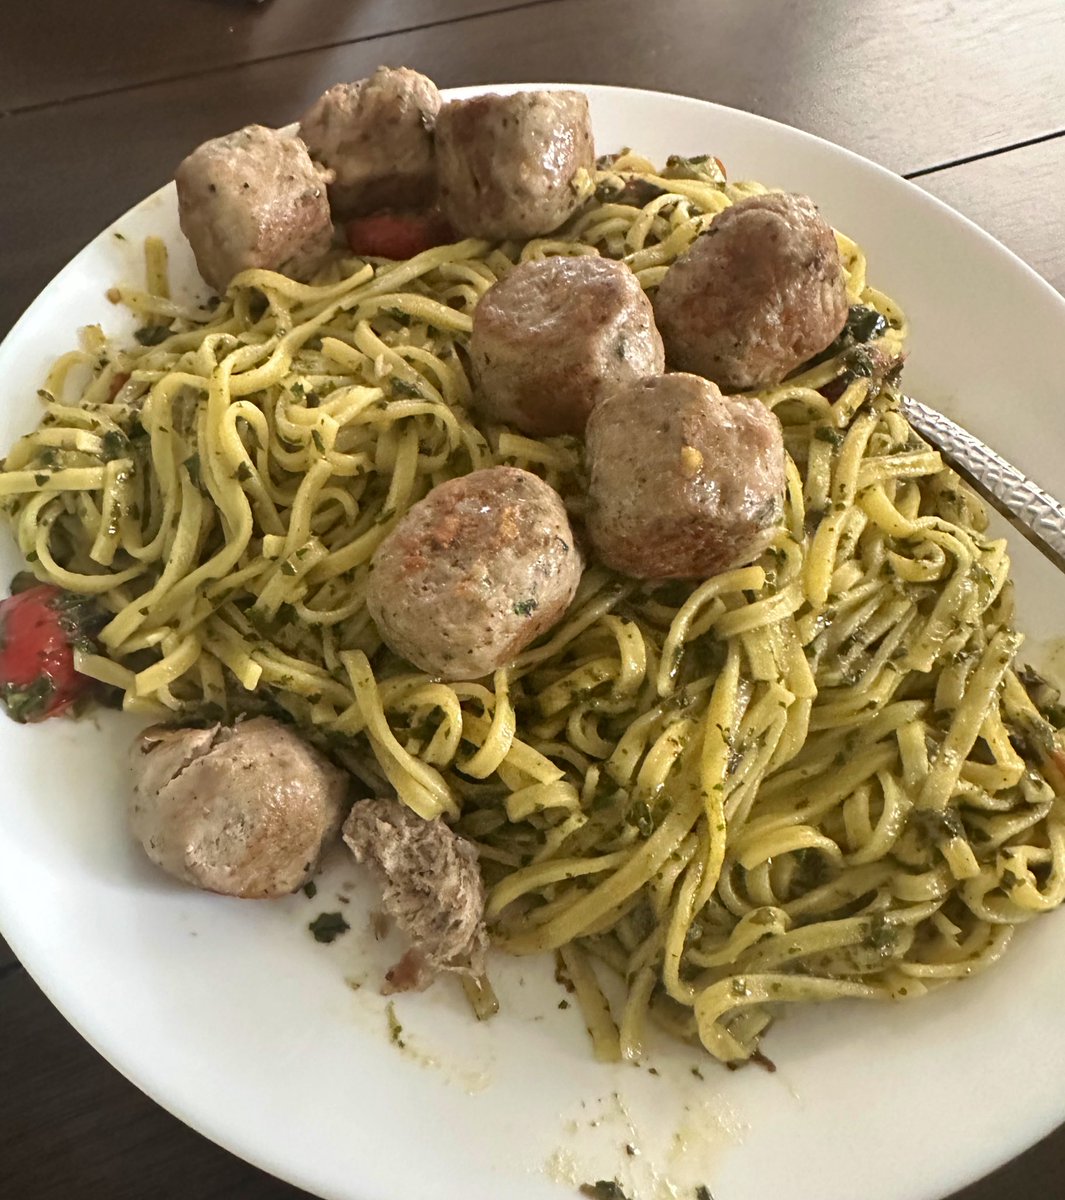 Trader Joe’s food comes to the rescue when both of us are sick & cant get off the couch. 😭🤧🤒🤕

🤷‍♀️Baingan Bhartha with chicken meatballs (so good, try it!). 

🤷‍♂️Pesto pasta with meatballs. 

What do you eat when sick?

#traderjoes #frozenfood #meatballs #sick #pasta #pesto